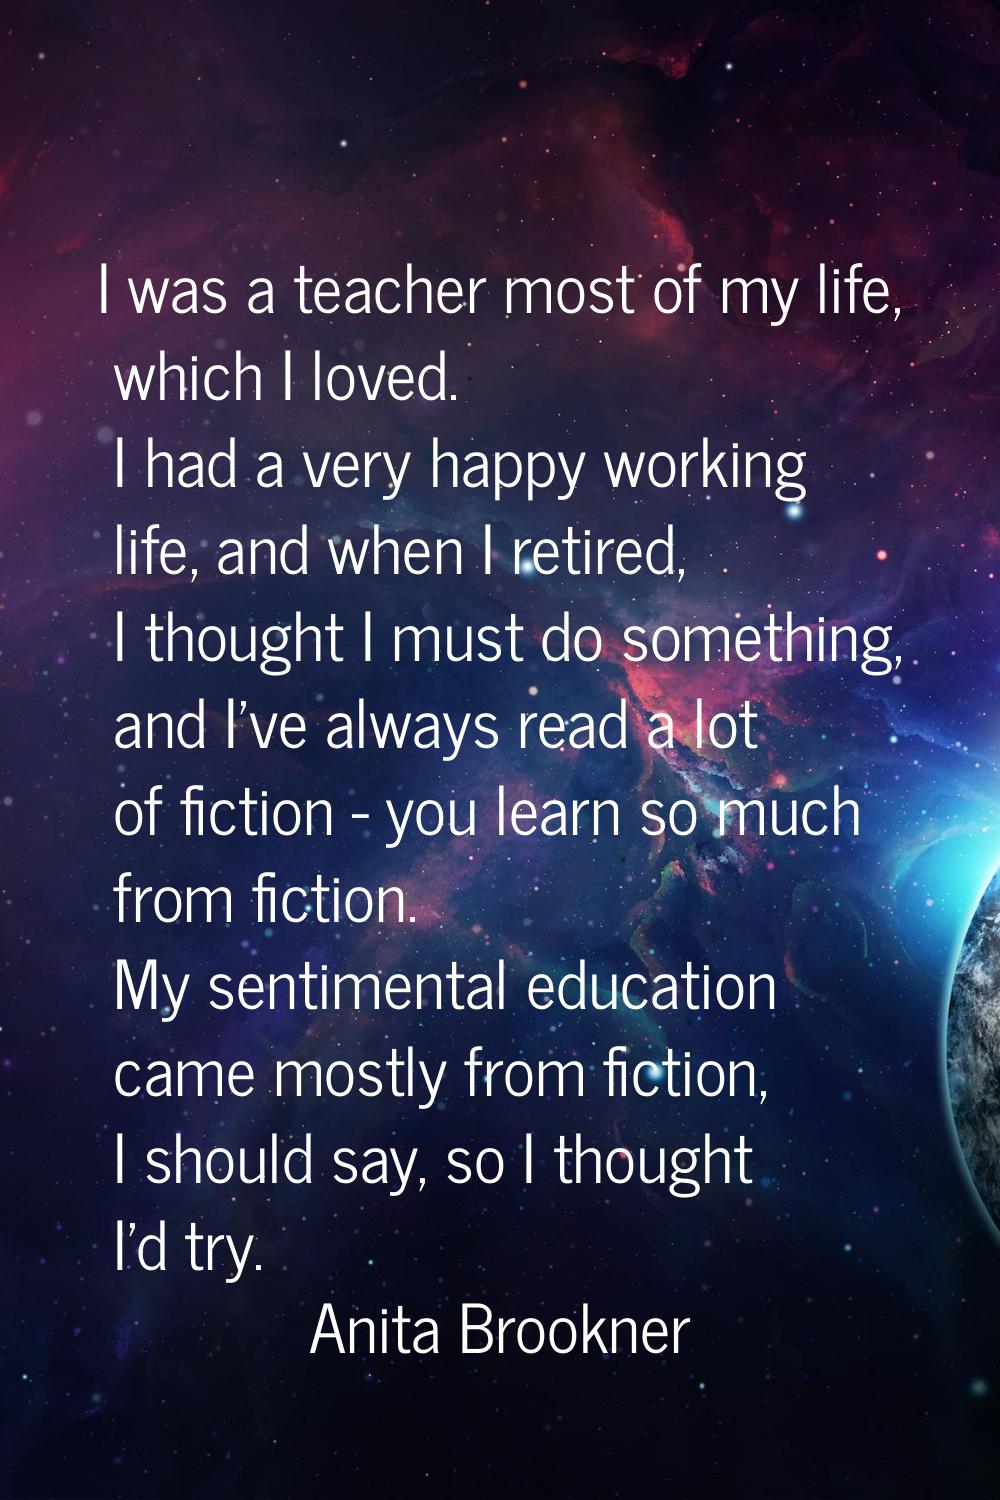 I was a teacher most of my life, which I loved. I had a very happy working life, and when I retired